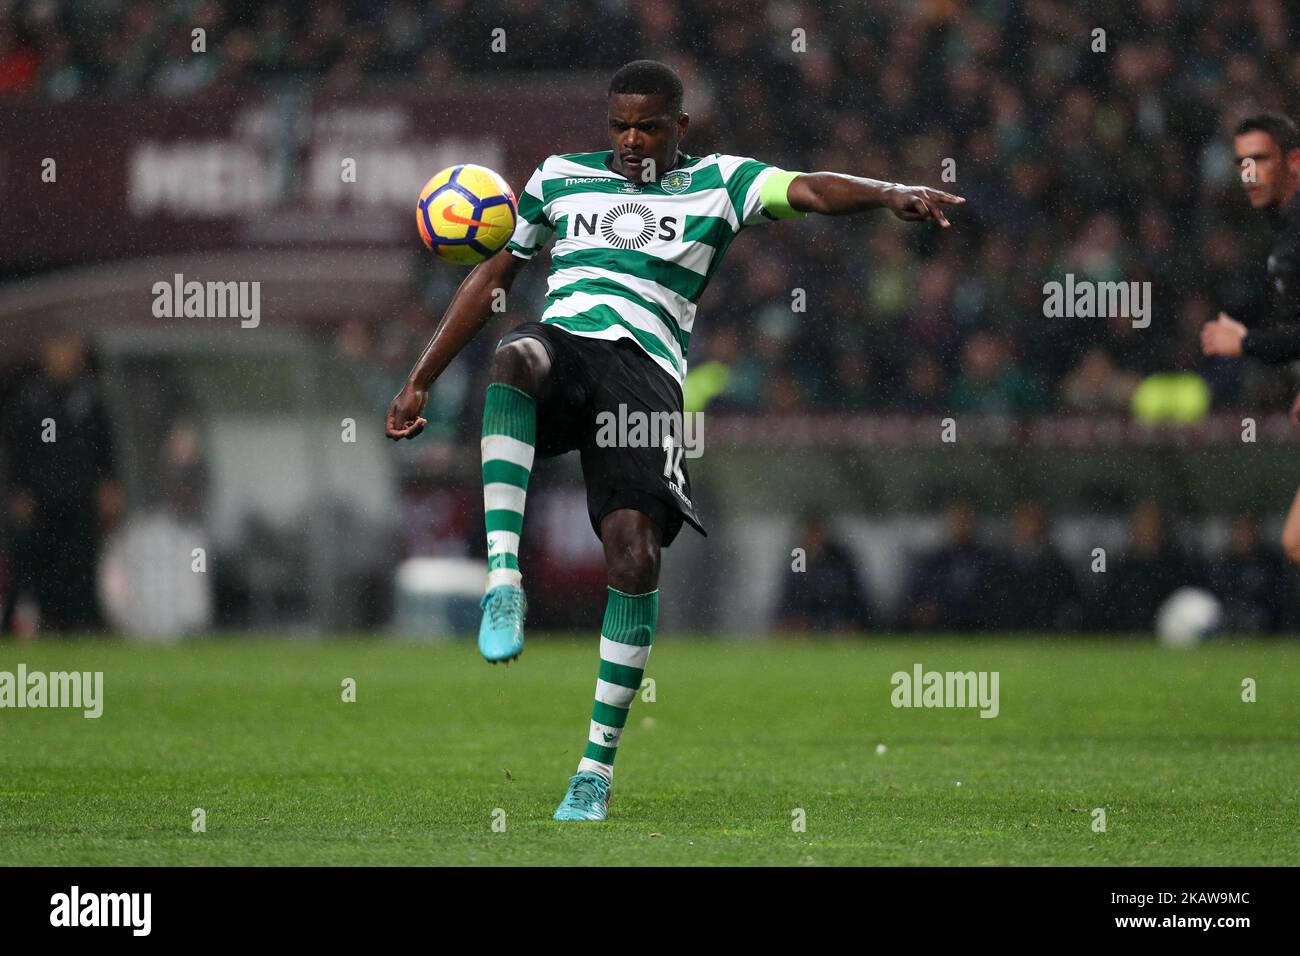 Sporting's Portuguese midfielder William Carvalho in action during the Portuguese League Cup 2017/18 match between Sporting CP and FC Porto, at Municipal de Braga Stadium in Braga on January 24, 2018. (Photo by Paulo Oliveira / DPI / NurPhoto) Stock Photo